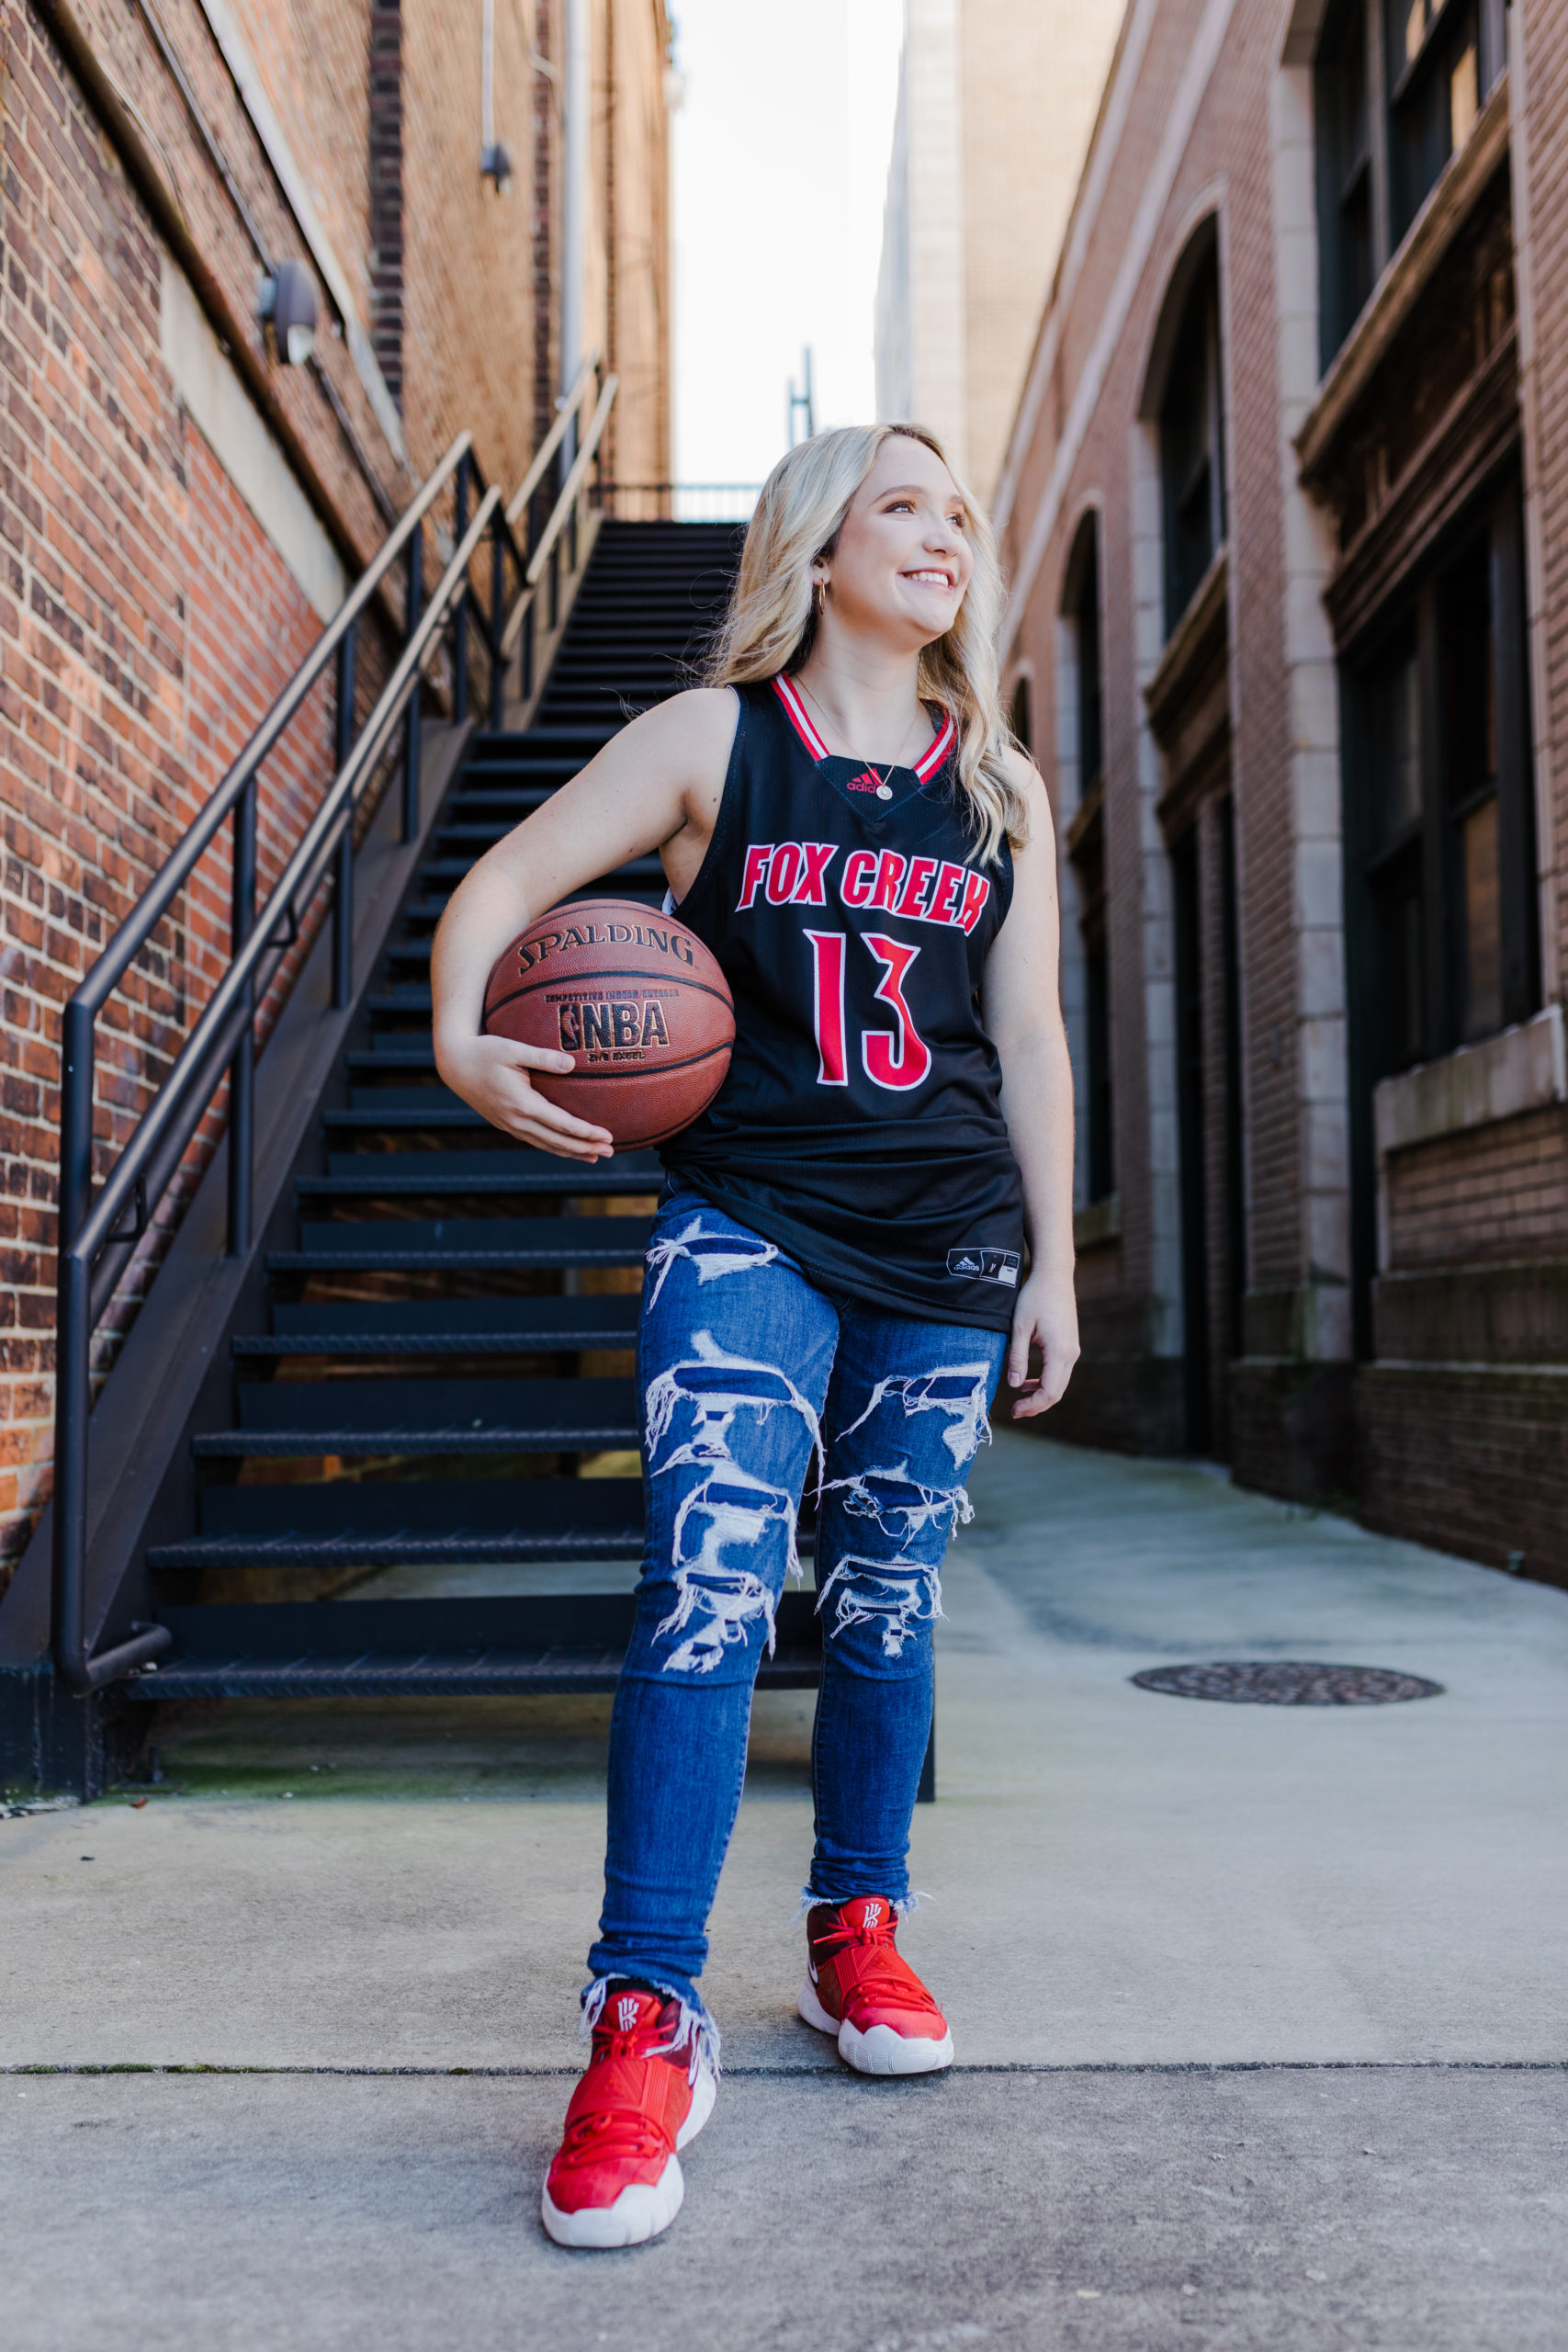 senio rpictures take by Augusta photographers with girl in a brick alley holding a basketball 